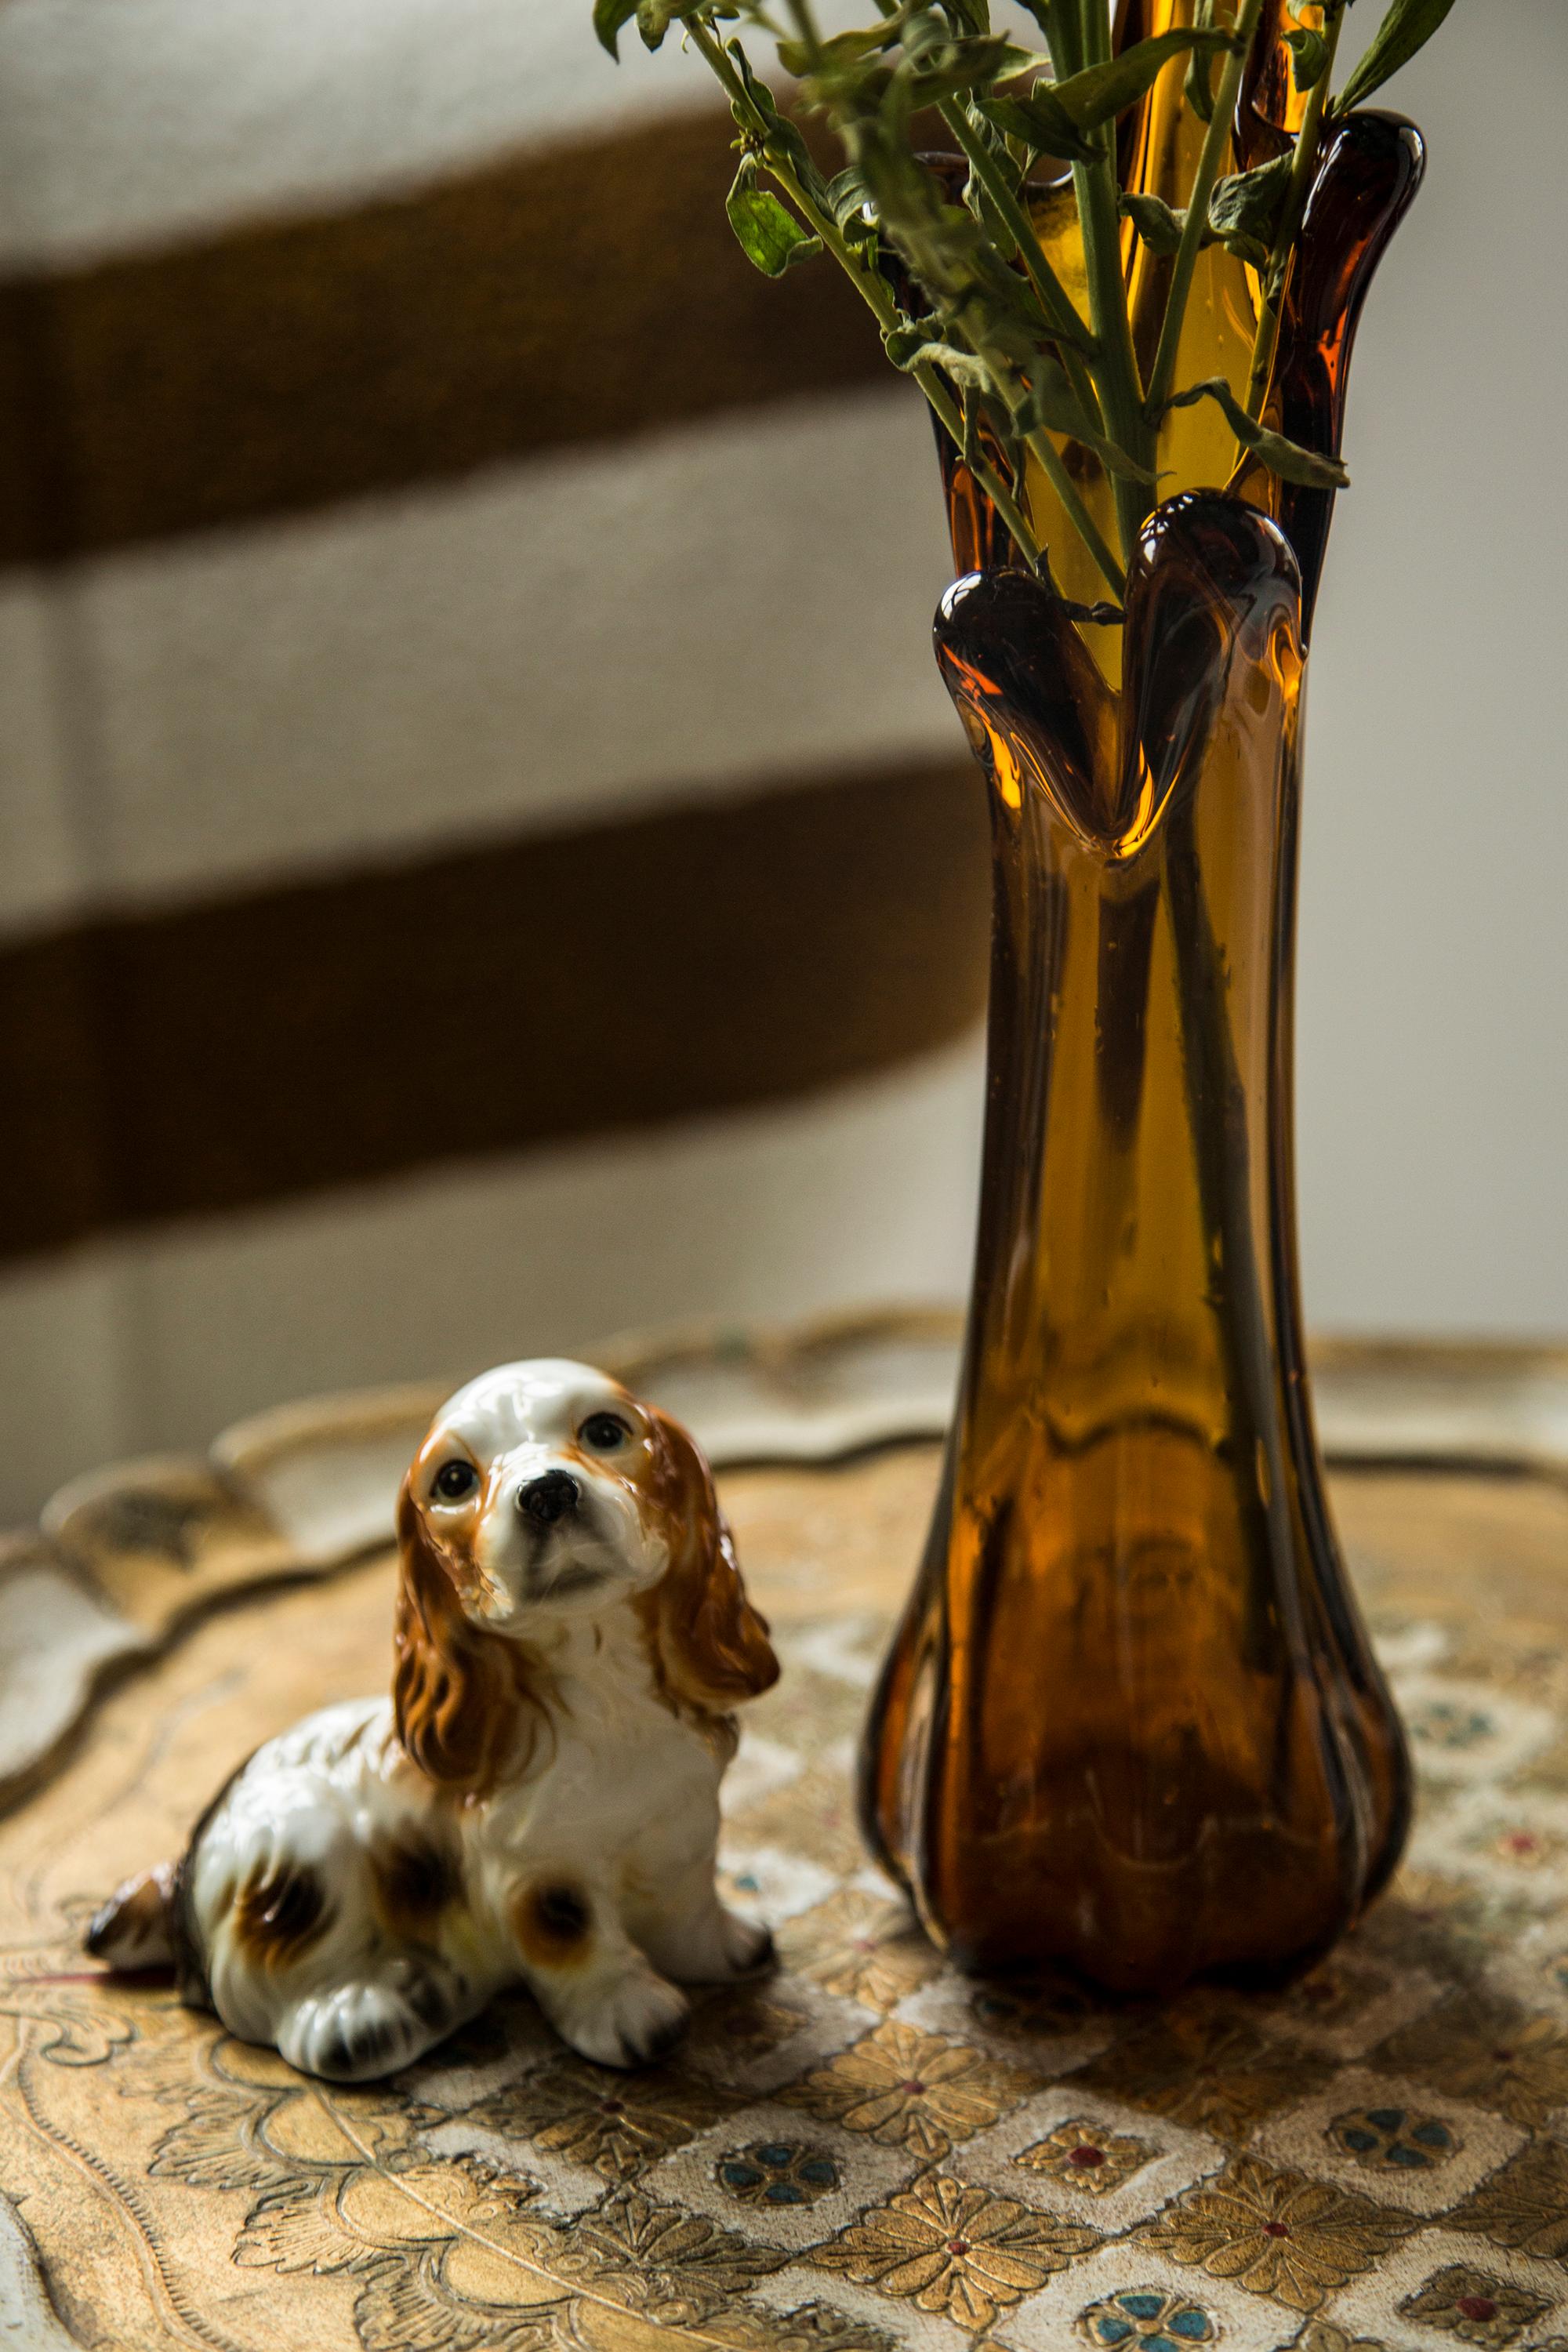 Painted ceramic, very good original vintage condition. No damages or cracks. Beautiful and unique decorative sculpture. Small dog sculpture was produced in Taiwan. Only one dog available.